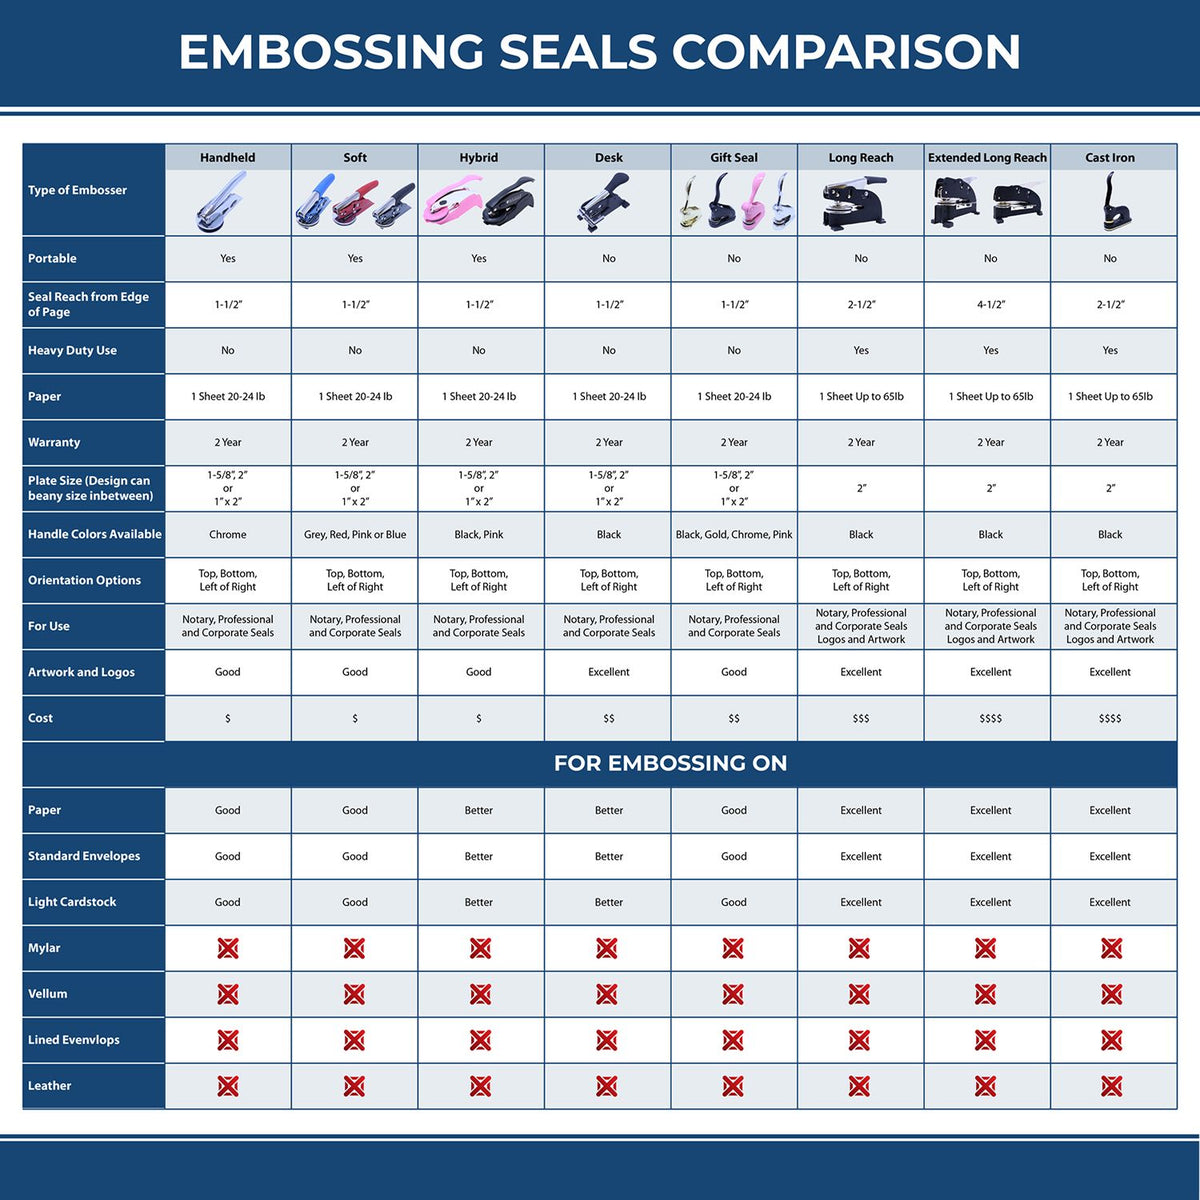 A comparison chart for the different types of mount models available for the Handheld Michigan Professional Engineer Embosser.